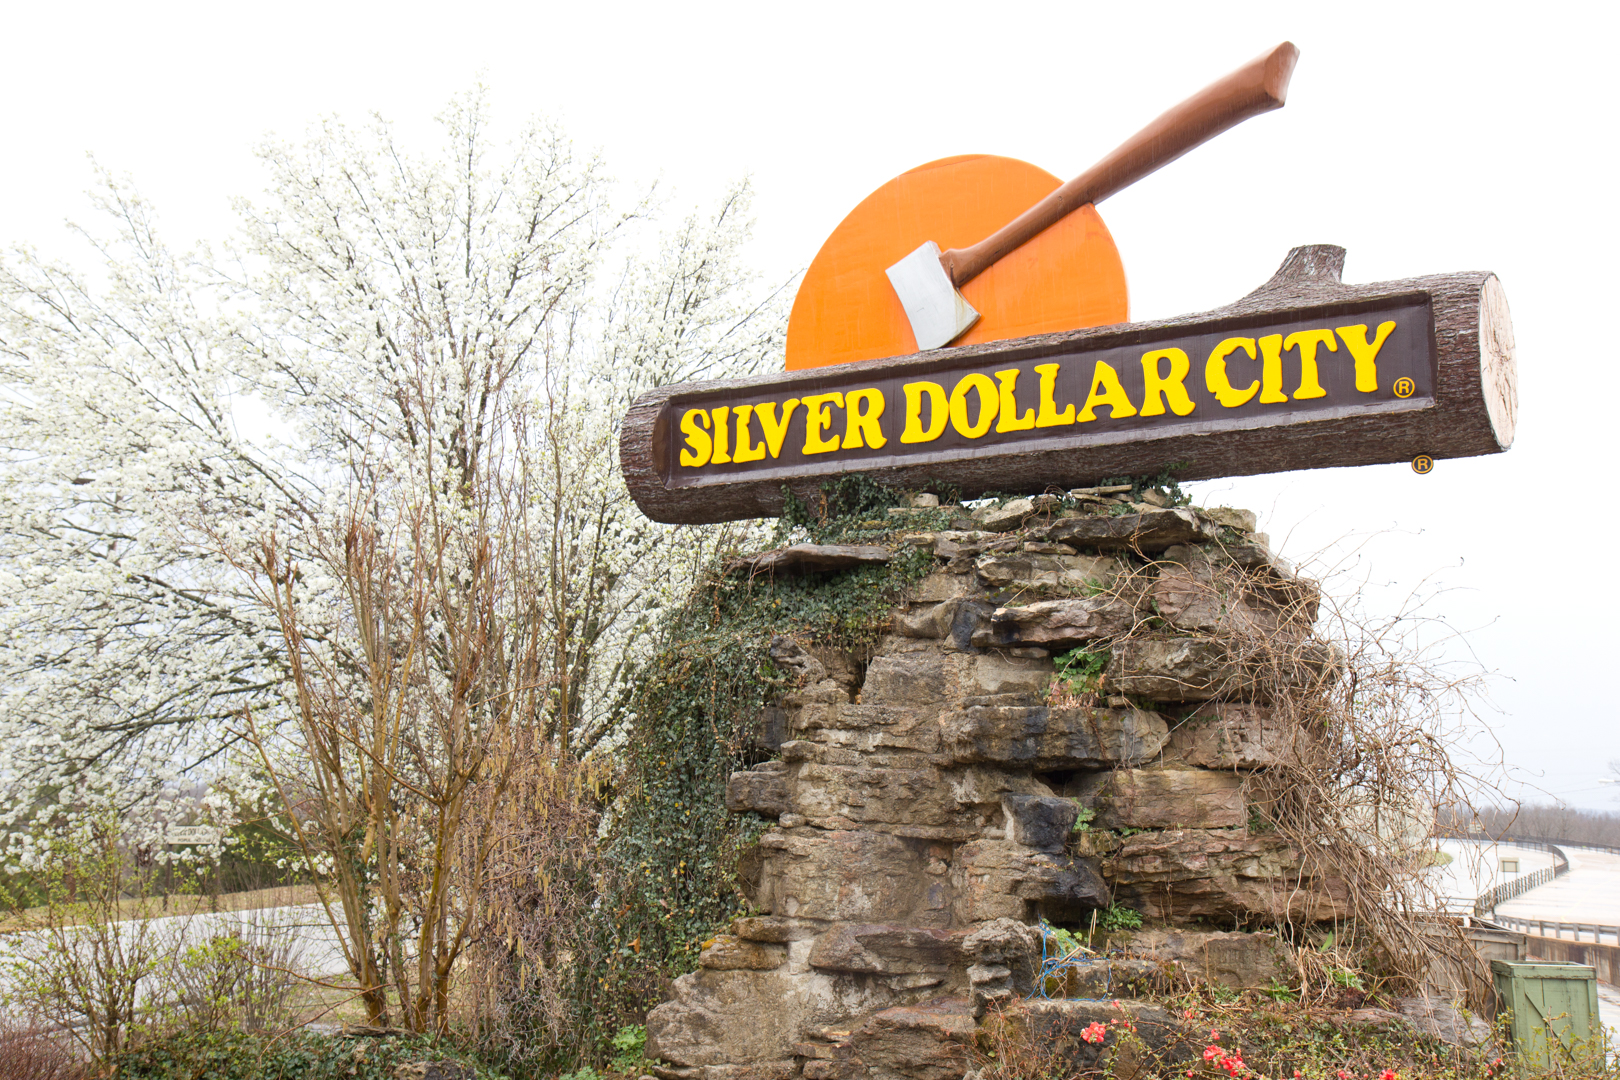 120308 SDC Entrance Spring Silver Dollar City - Five historical questions about Branson for your ponderation